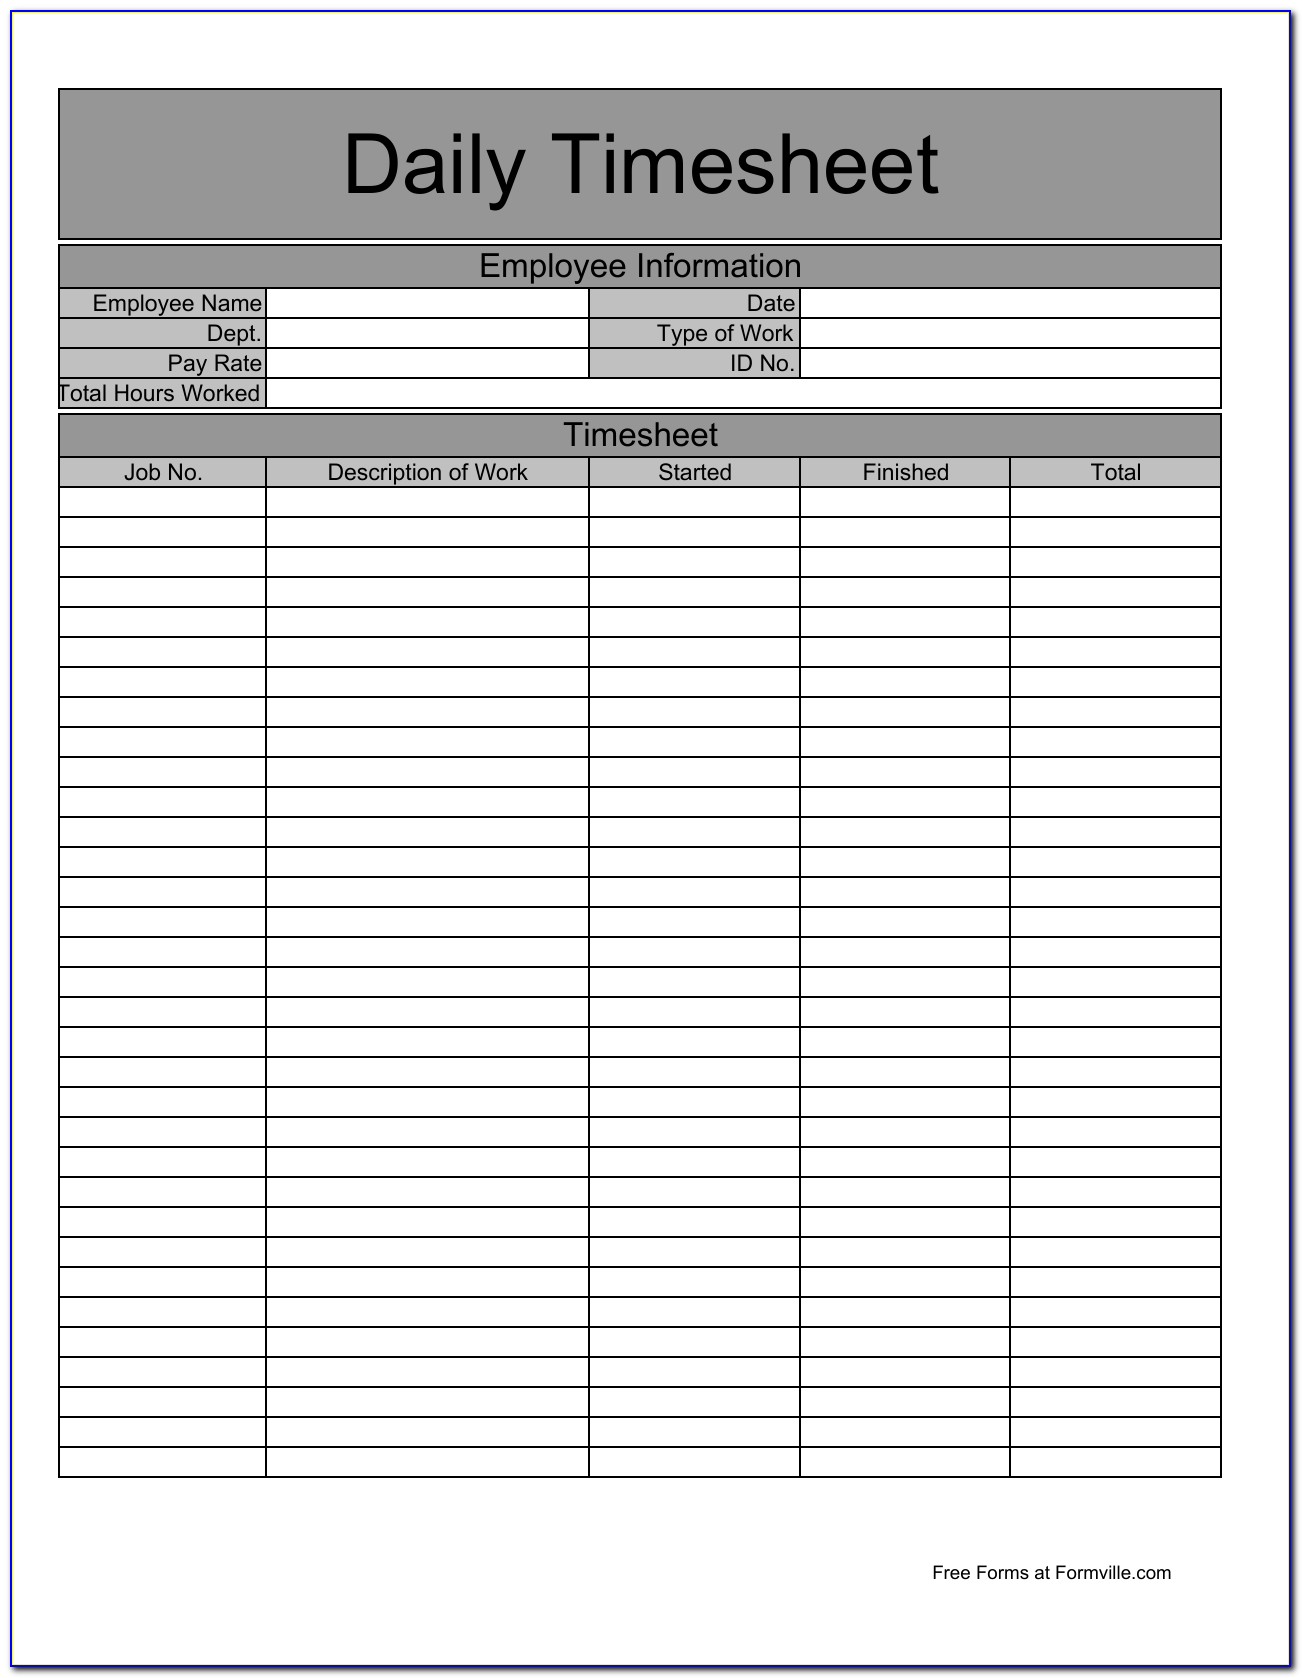 Daily Work Plan Template Excel Free Download